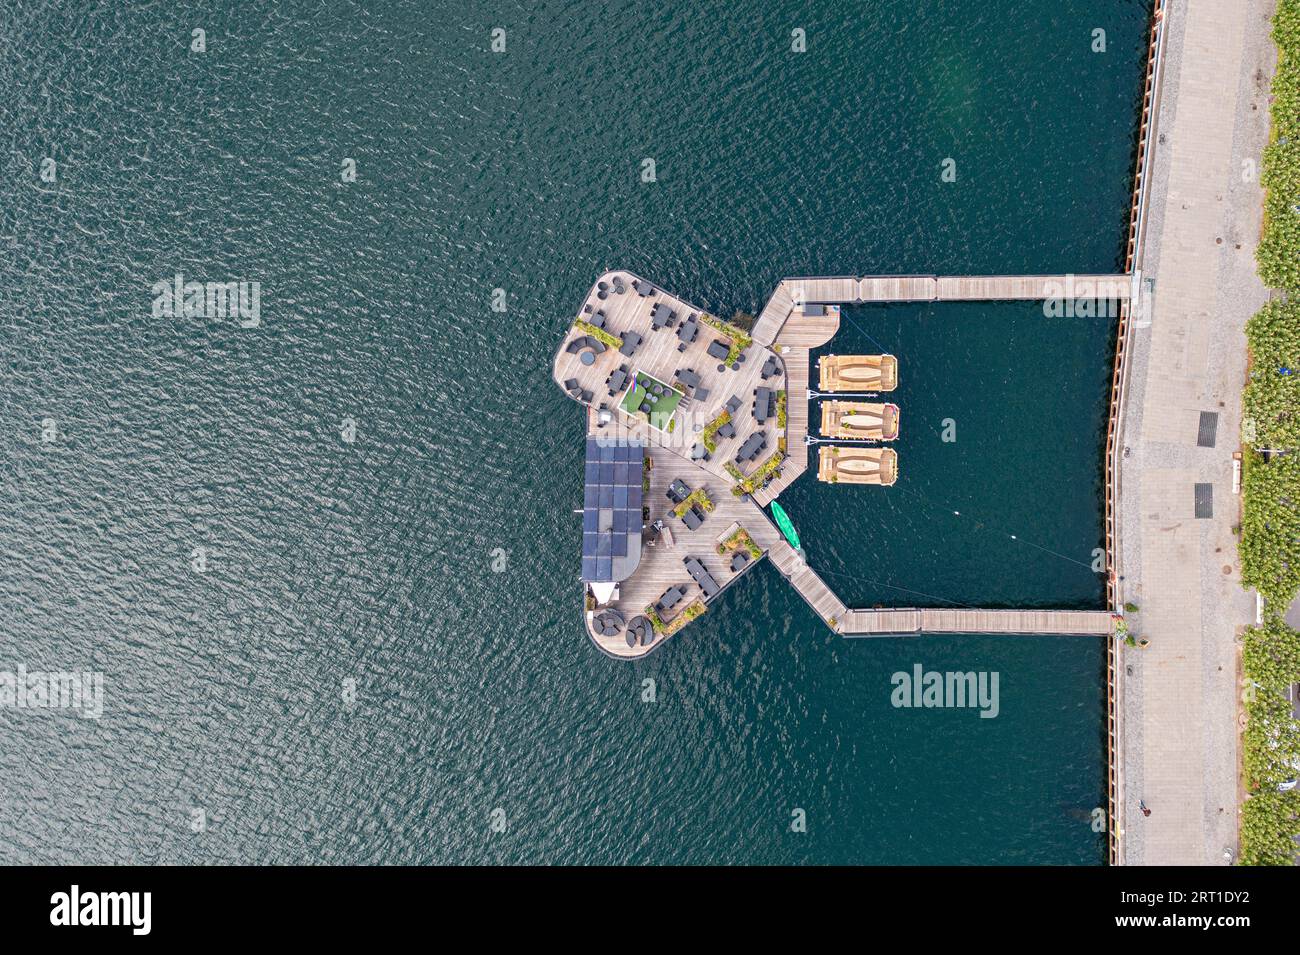 Copenhagen, Denmark, August 20, 2021: Aerial drone view of Green Island CPH, a floating cafe bar in the harbour Stock Photo